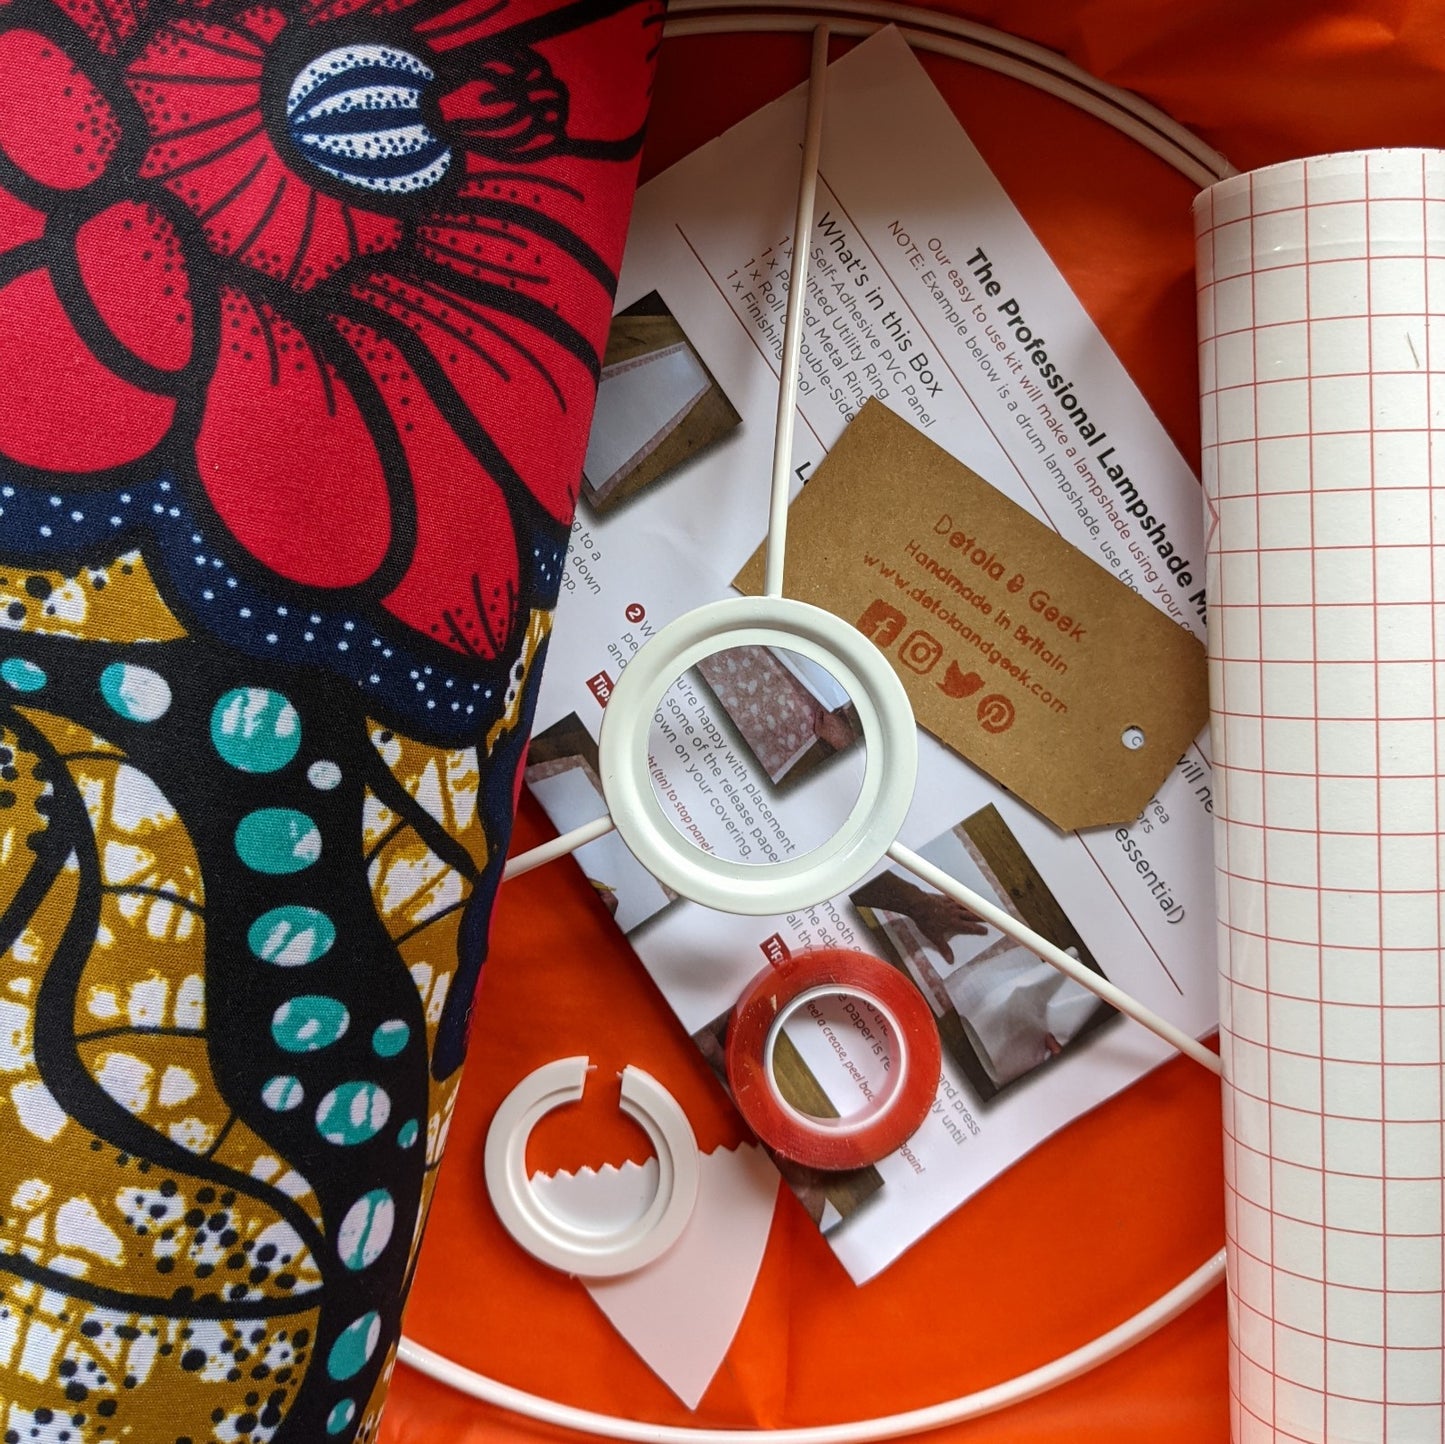 30cm Drum Lampshade Craft Kit, Make your own Lampshade